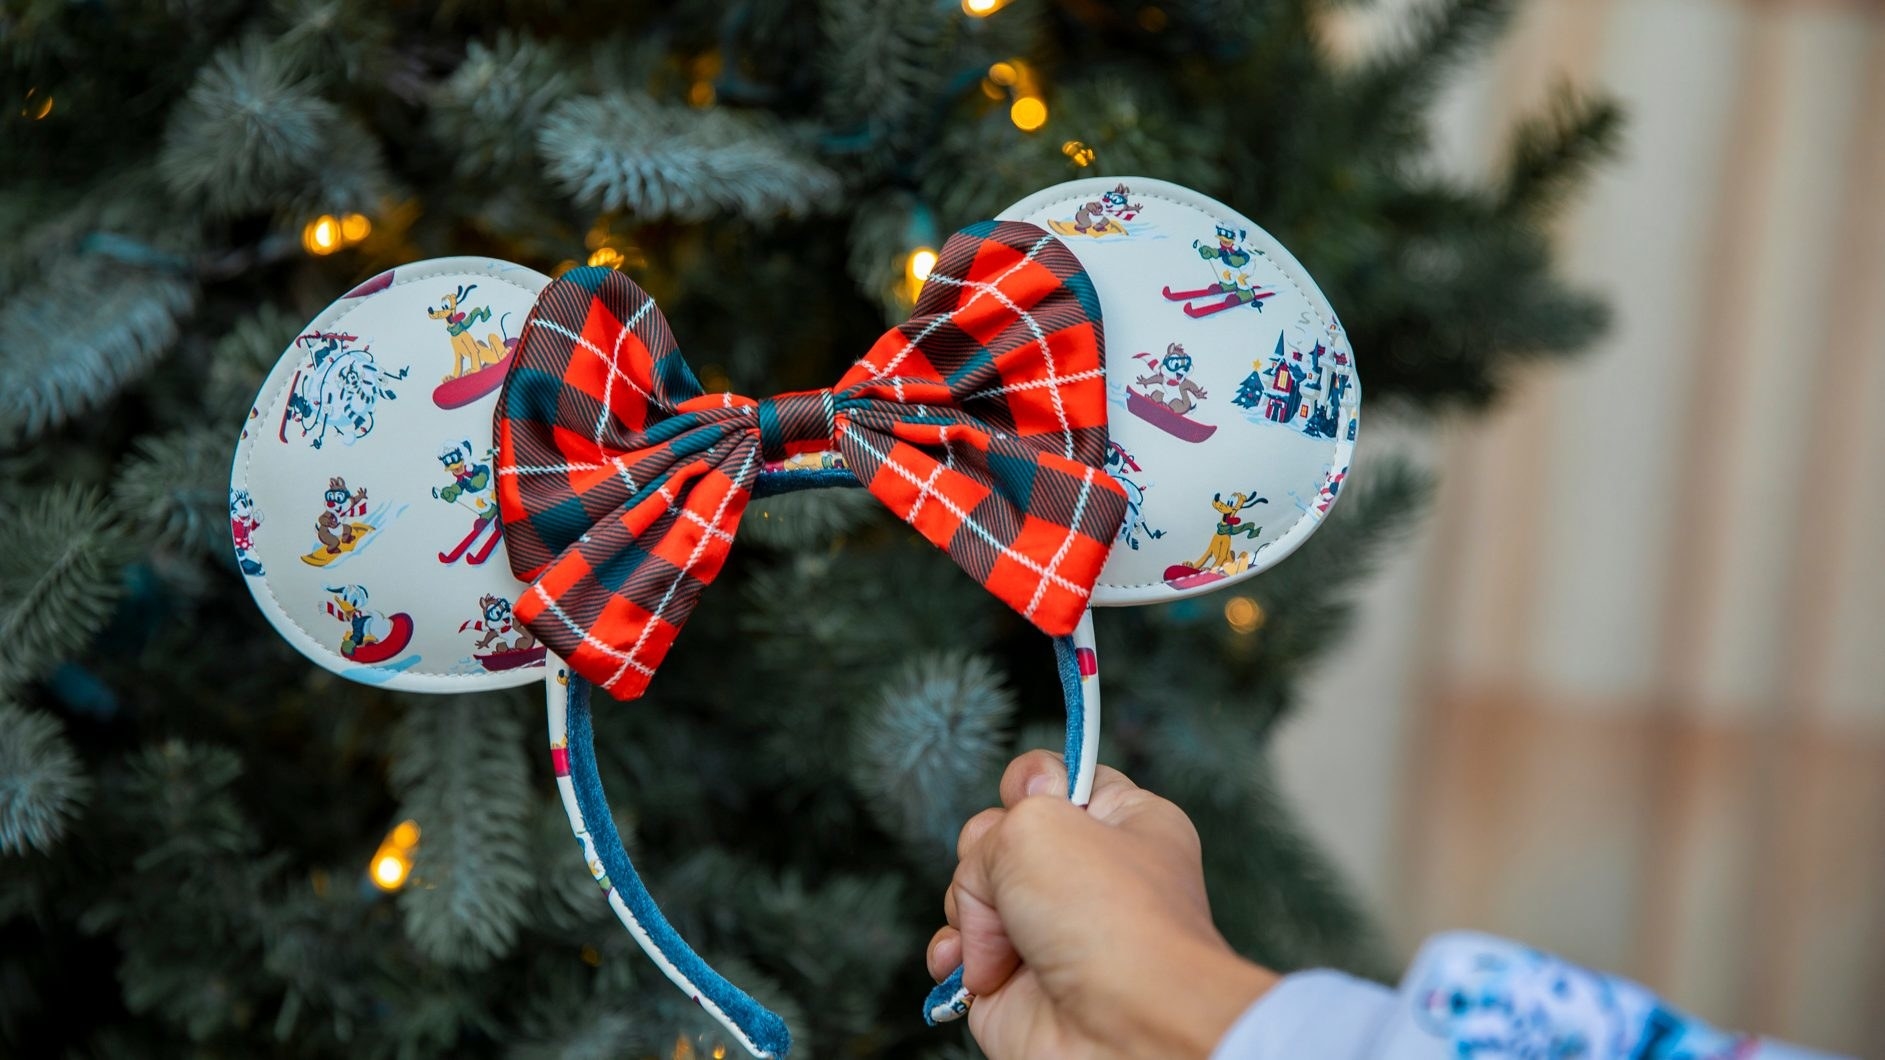 A pair of minnie ears with a plaid bow and winter scenes on the ears